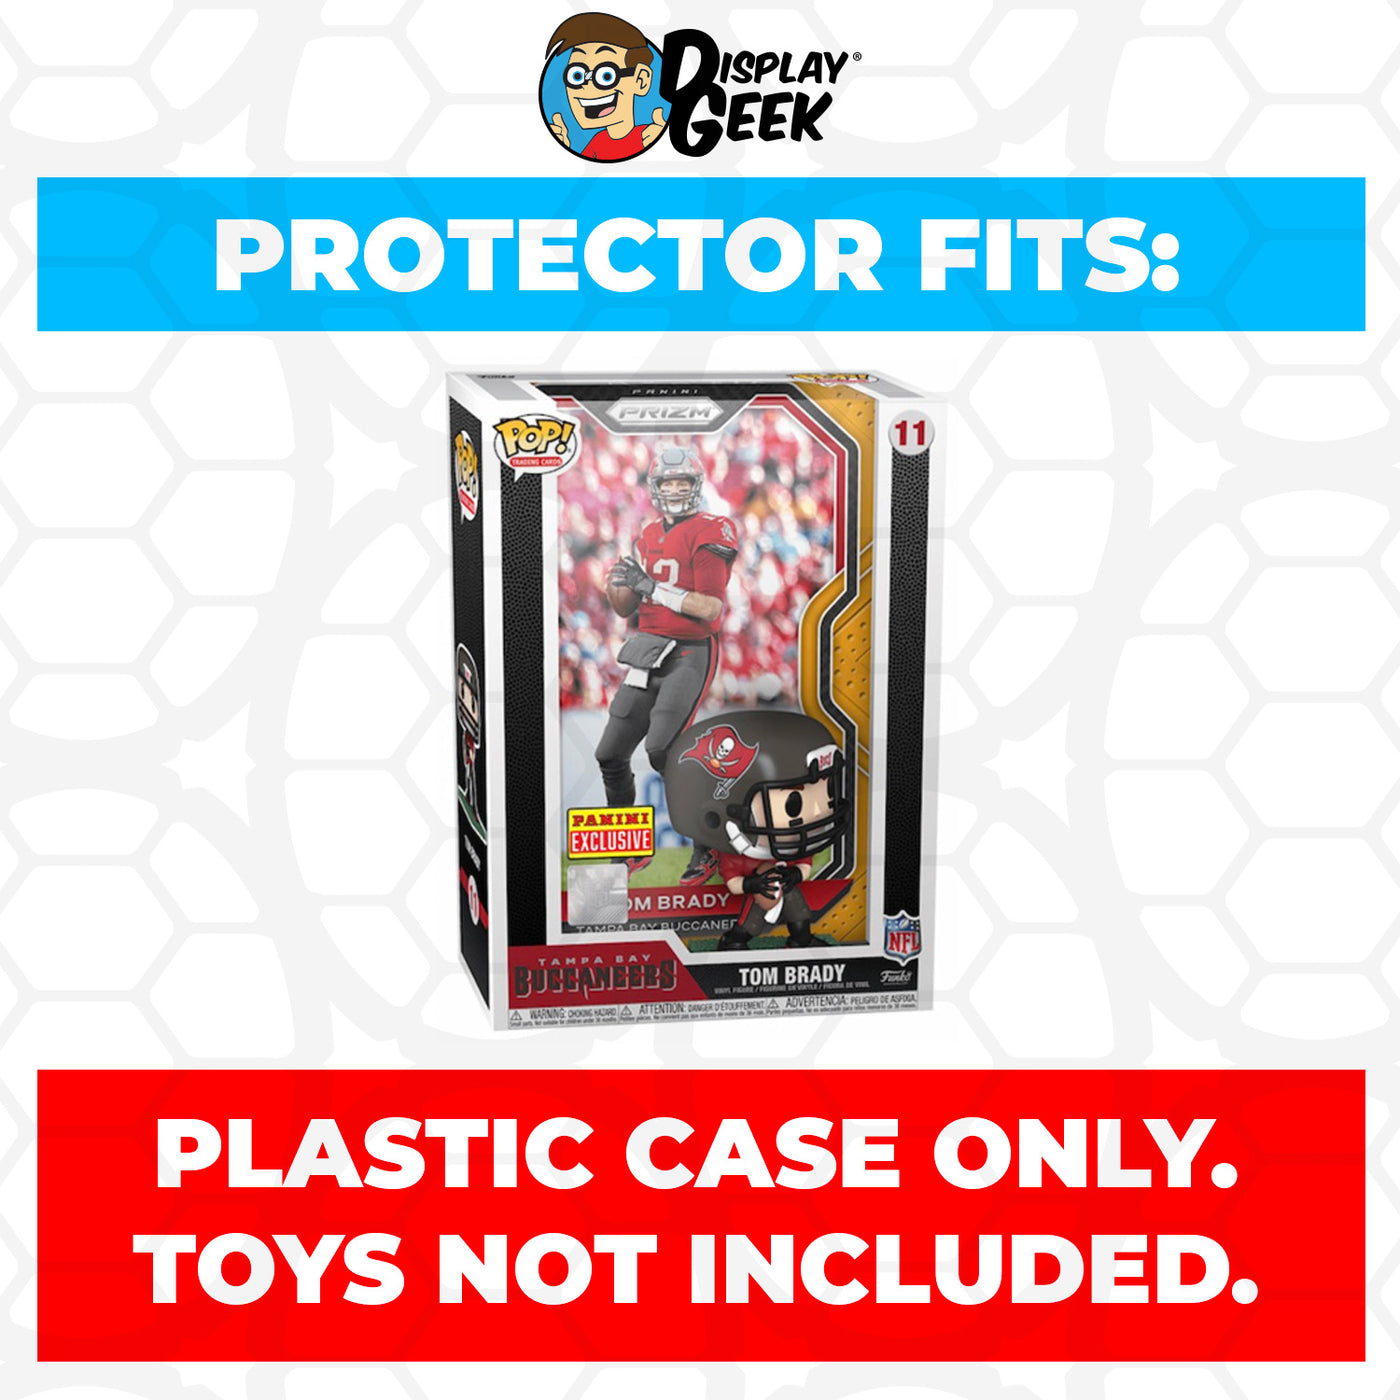 Pop Protector for Tom Brady Tampa Bay Buccaneers #11 Funko Trading Cards on The Protector Guide App by Display Geek